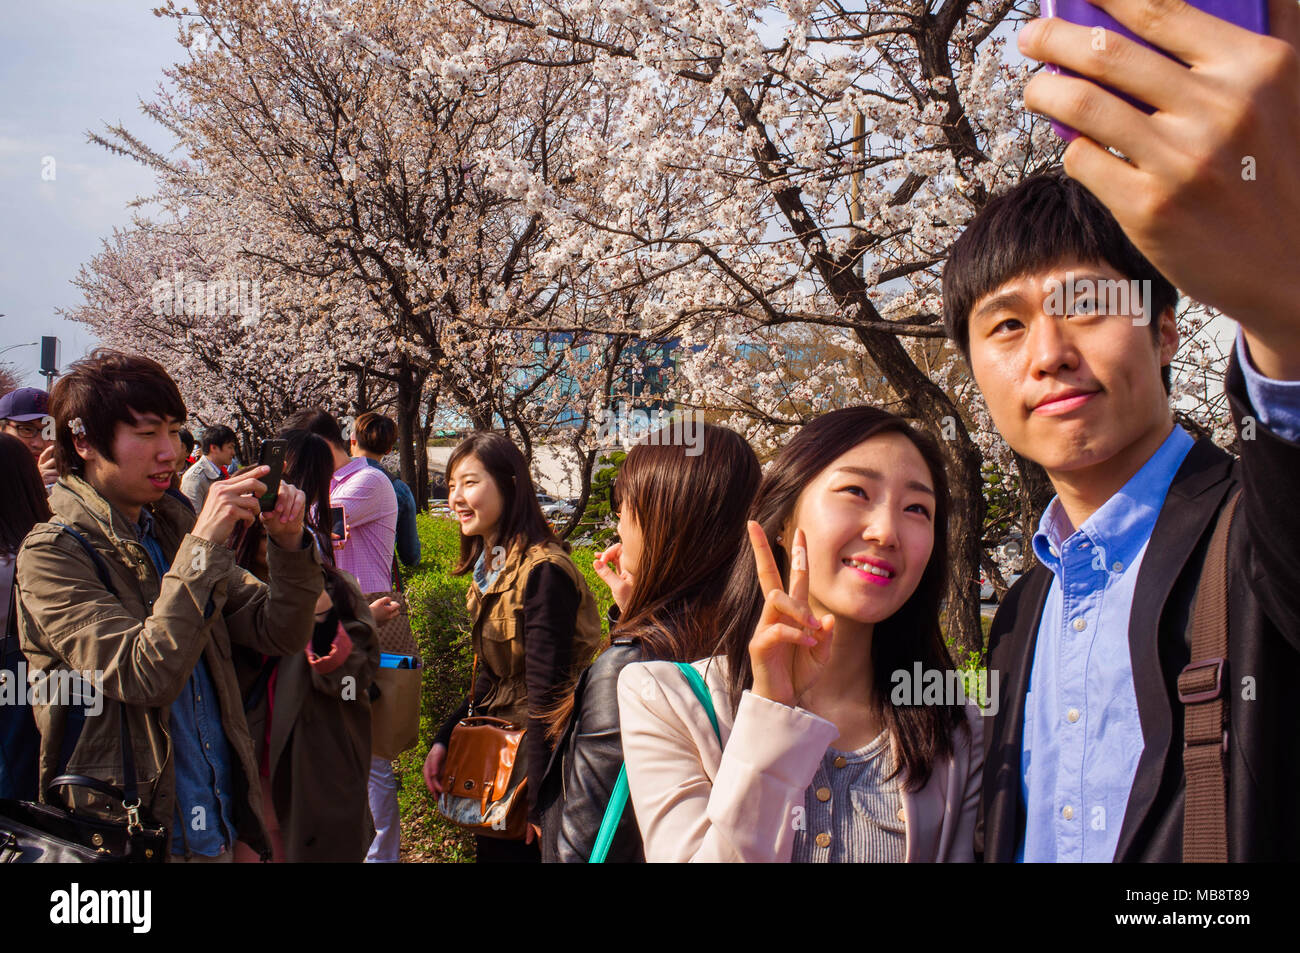 Young couples take selfies together at the Cherry Blossom festival in Yeouido district in Seoul, celebrating the blooming of the flowers in Spring. Stock Photo